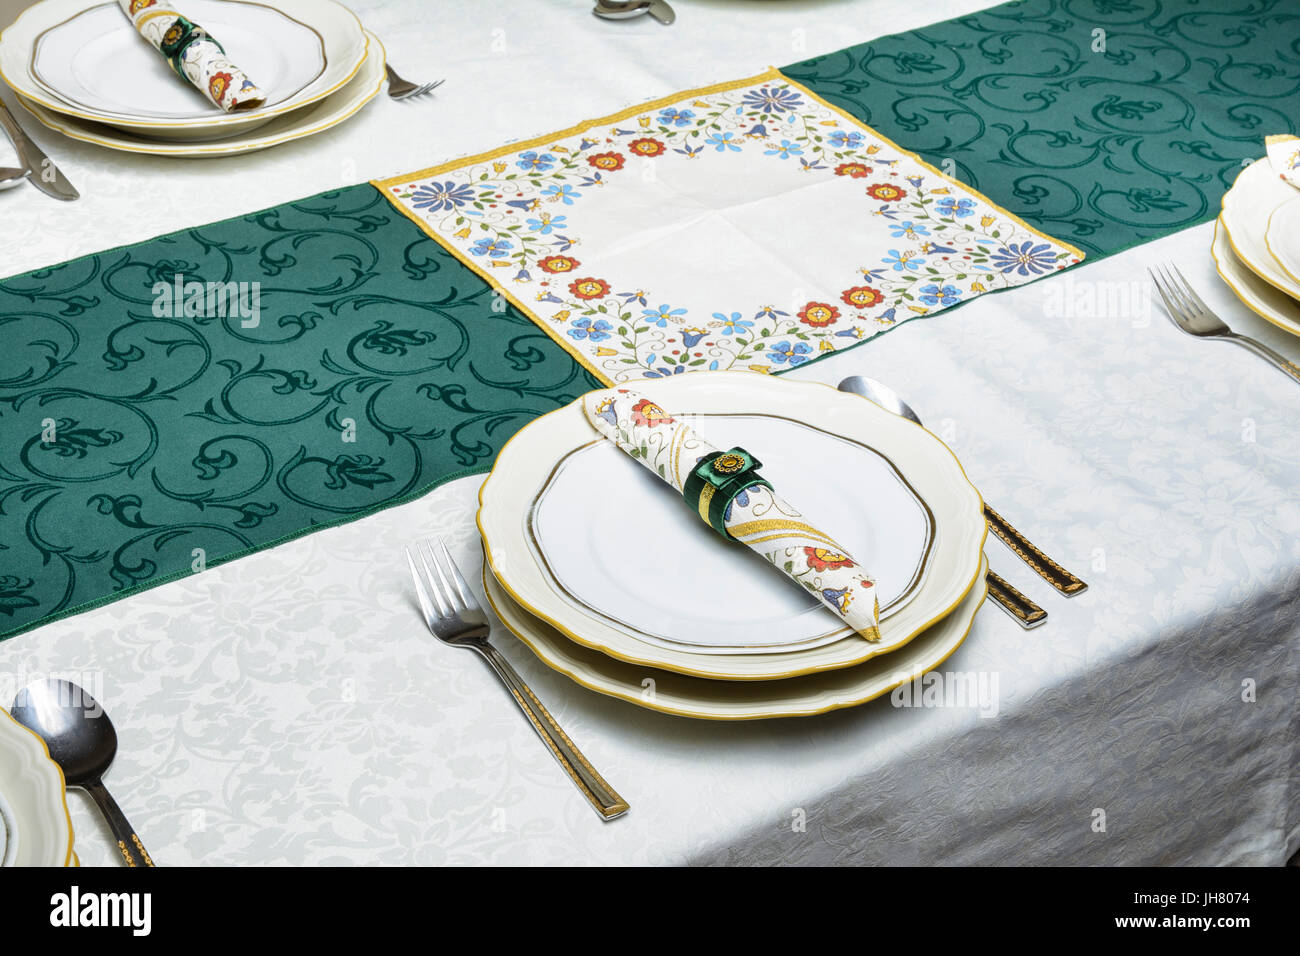 Dining table is set. Tablecloth, plates, knife, fork, spoon, napkin in the napkin ring. Selective focus. Stock Photo